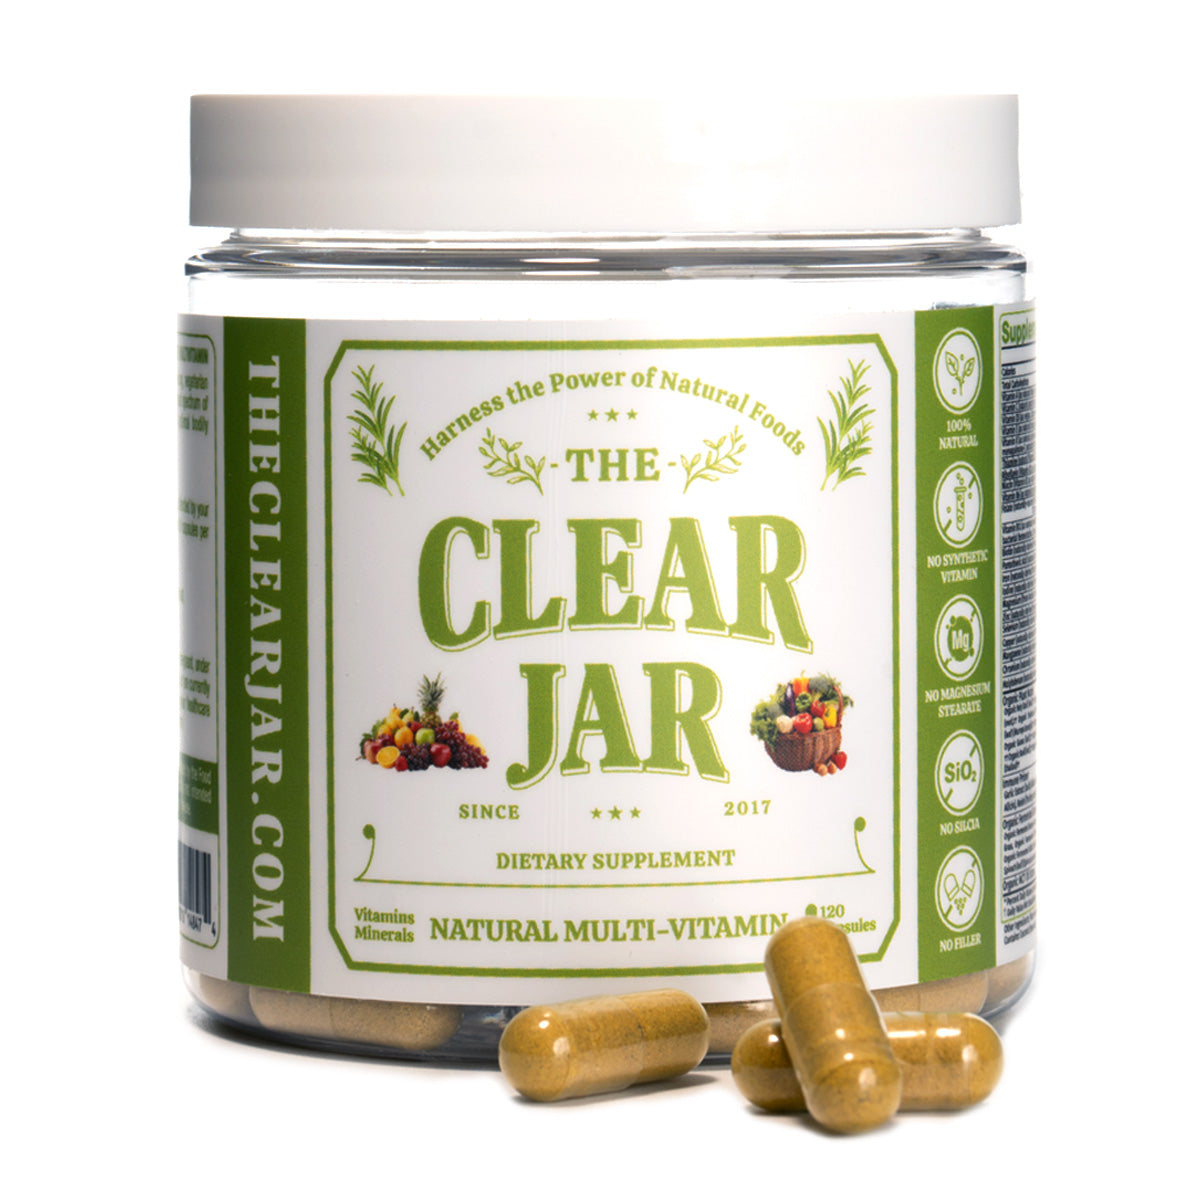 All Natural Multi-Vitamin, Vitamin A D E K C B and minerals,120 capsules, Non-Synthetic - The Clear Jar